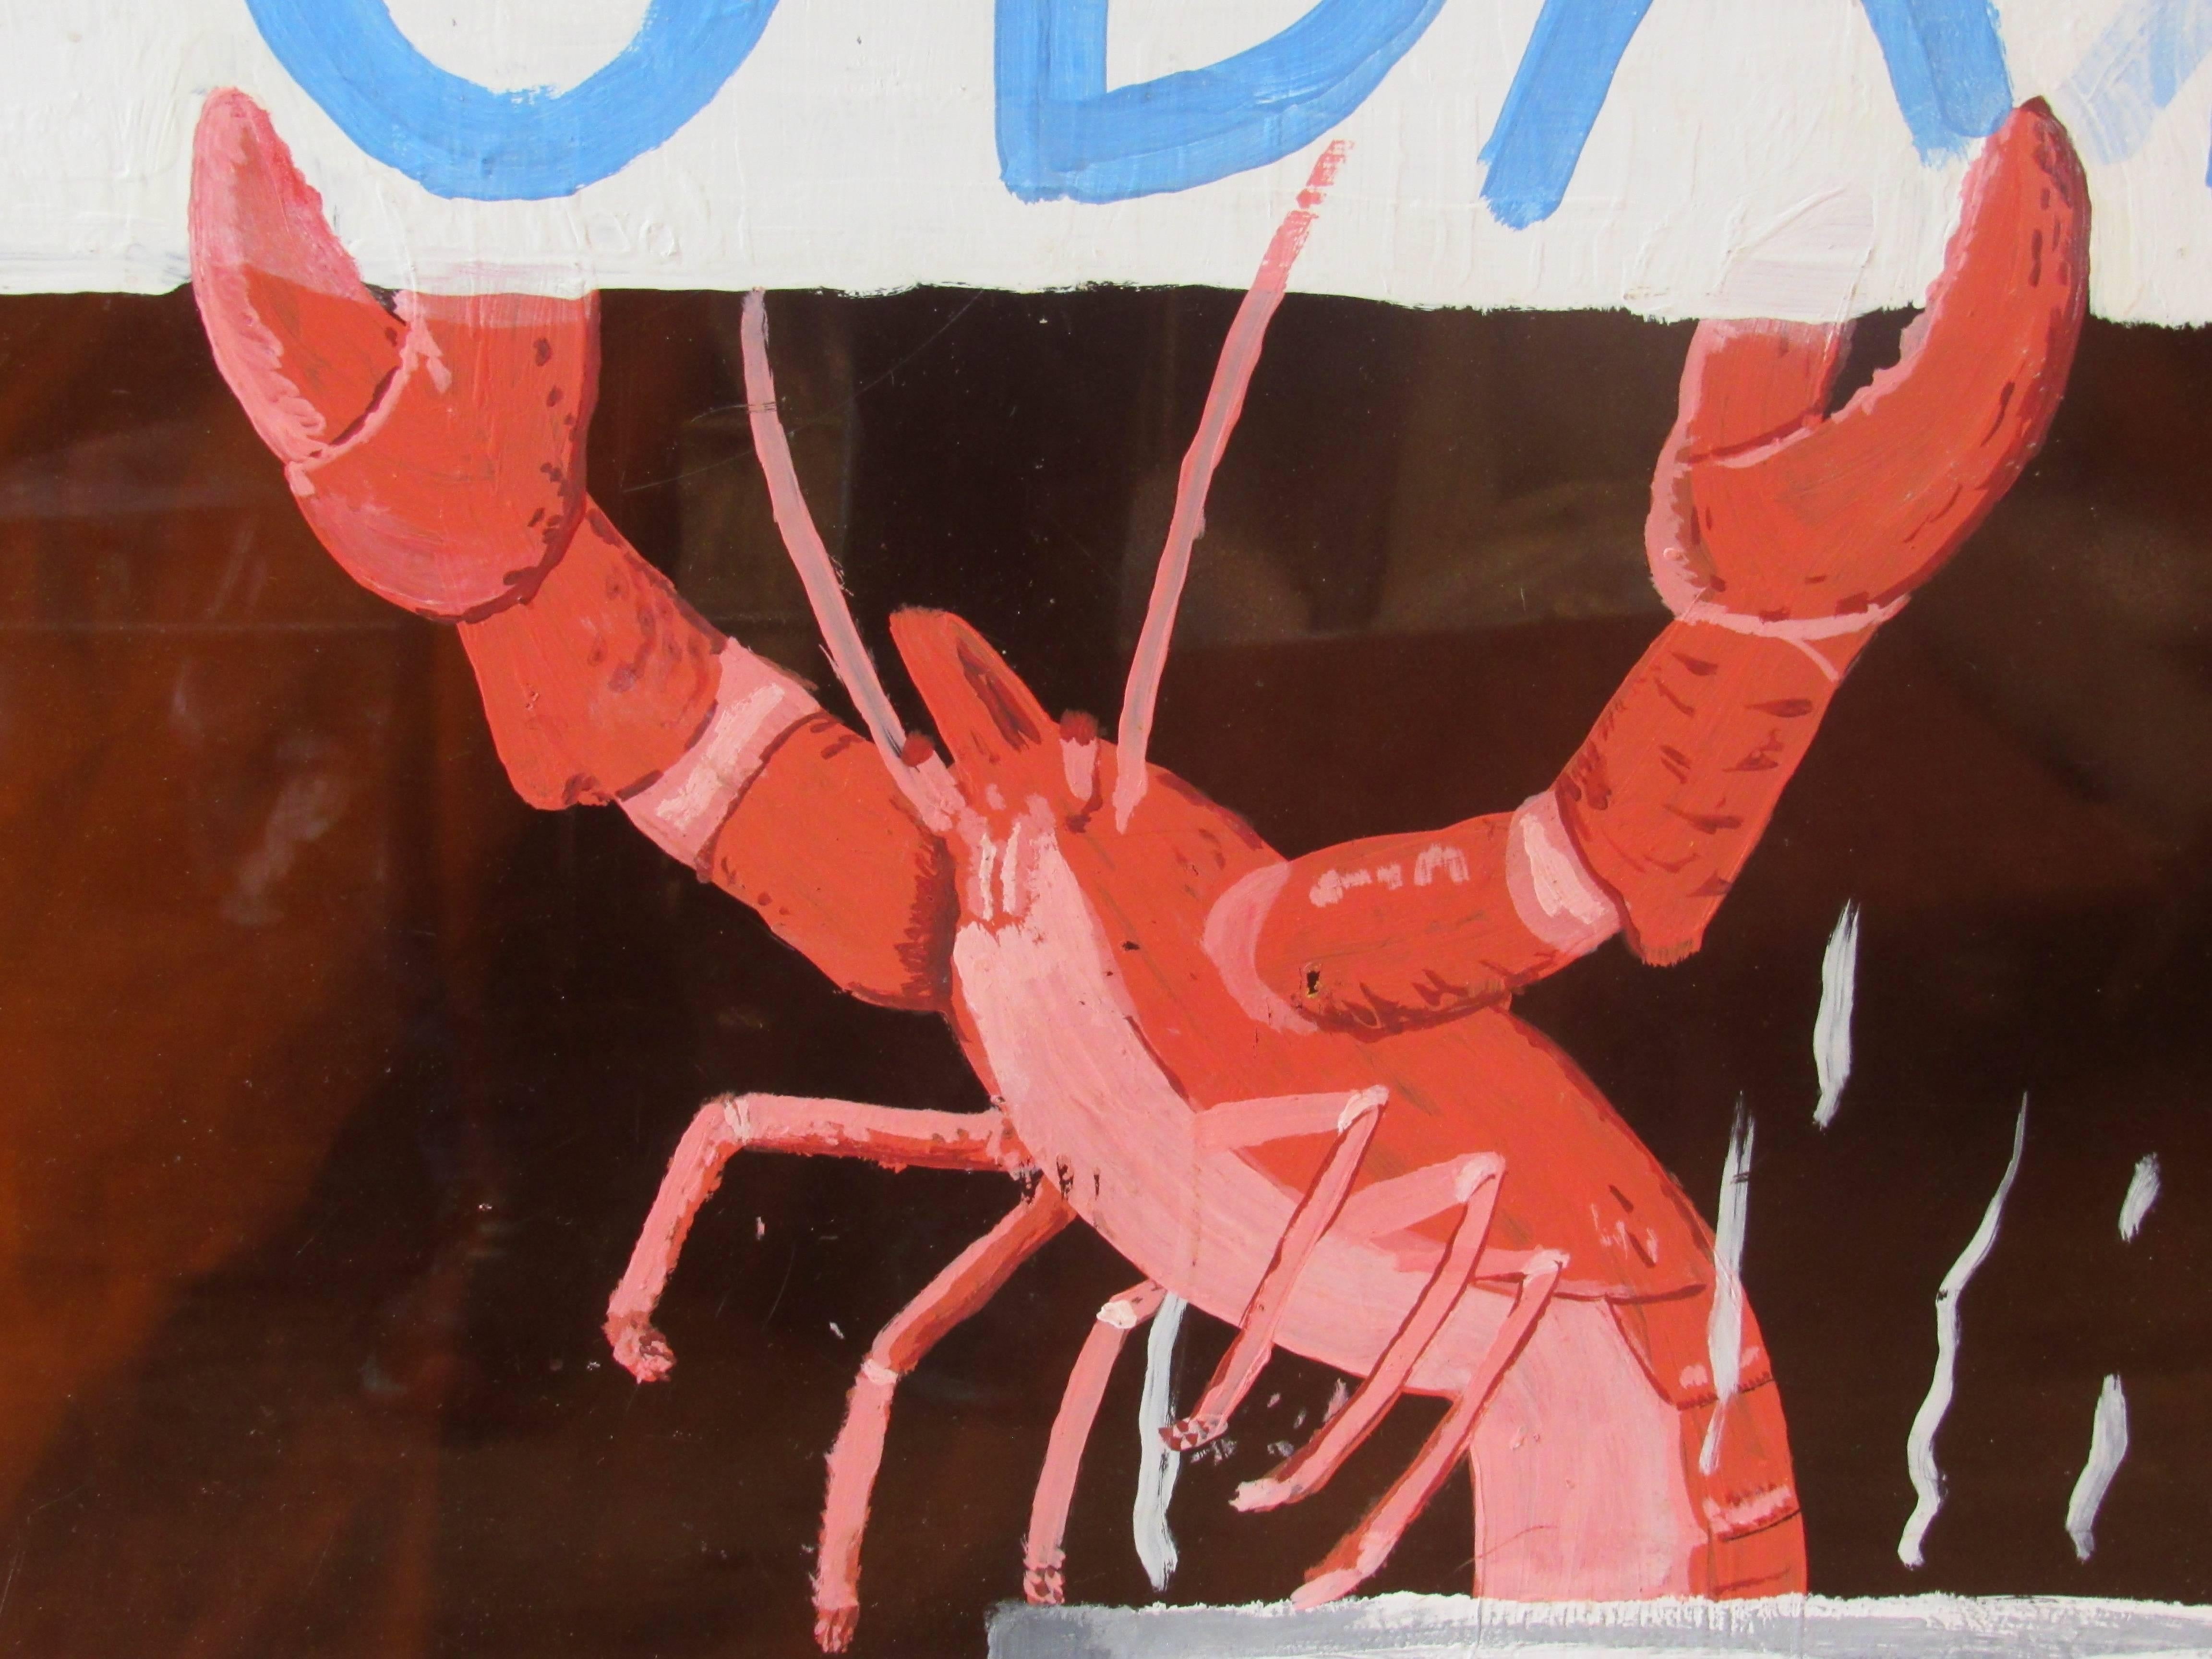 20th Century Midcentury Lobster for Sale Hand-Painted Sign on Bronze Lucite, 1960s-1970s